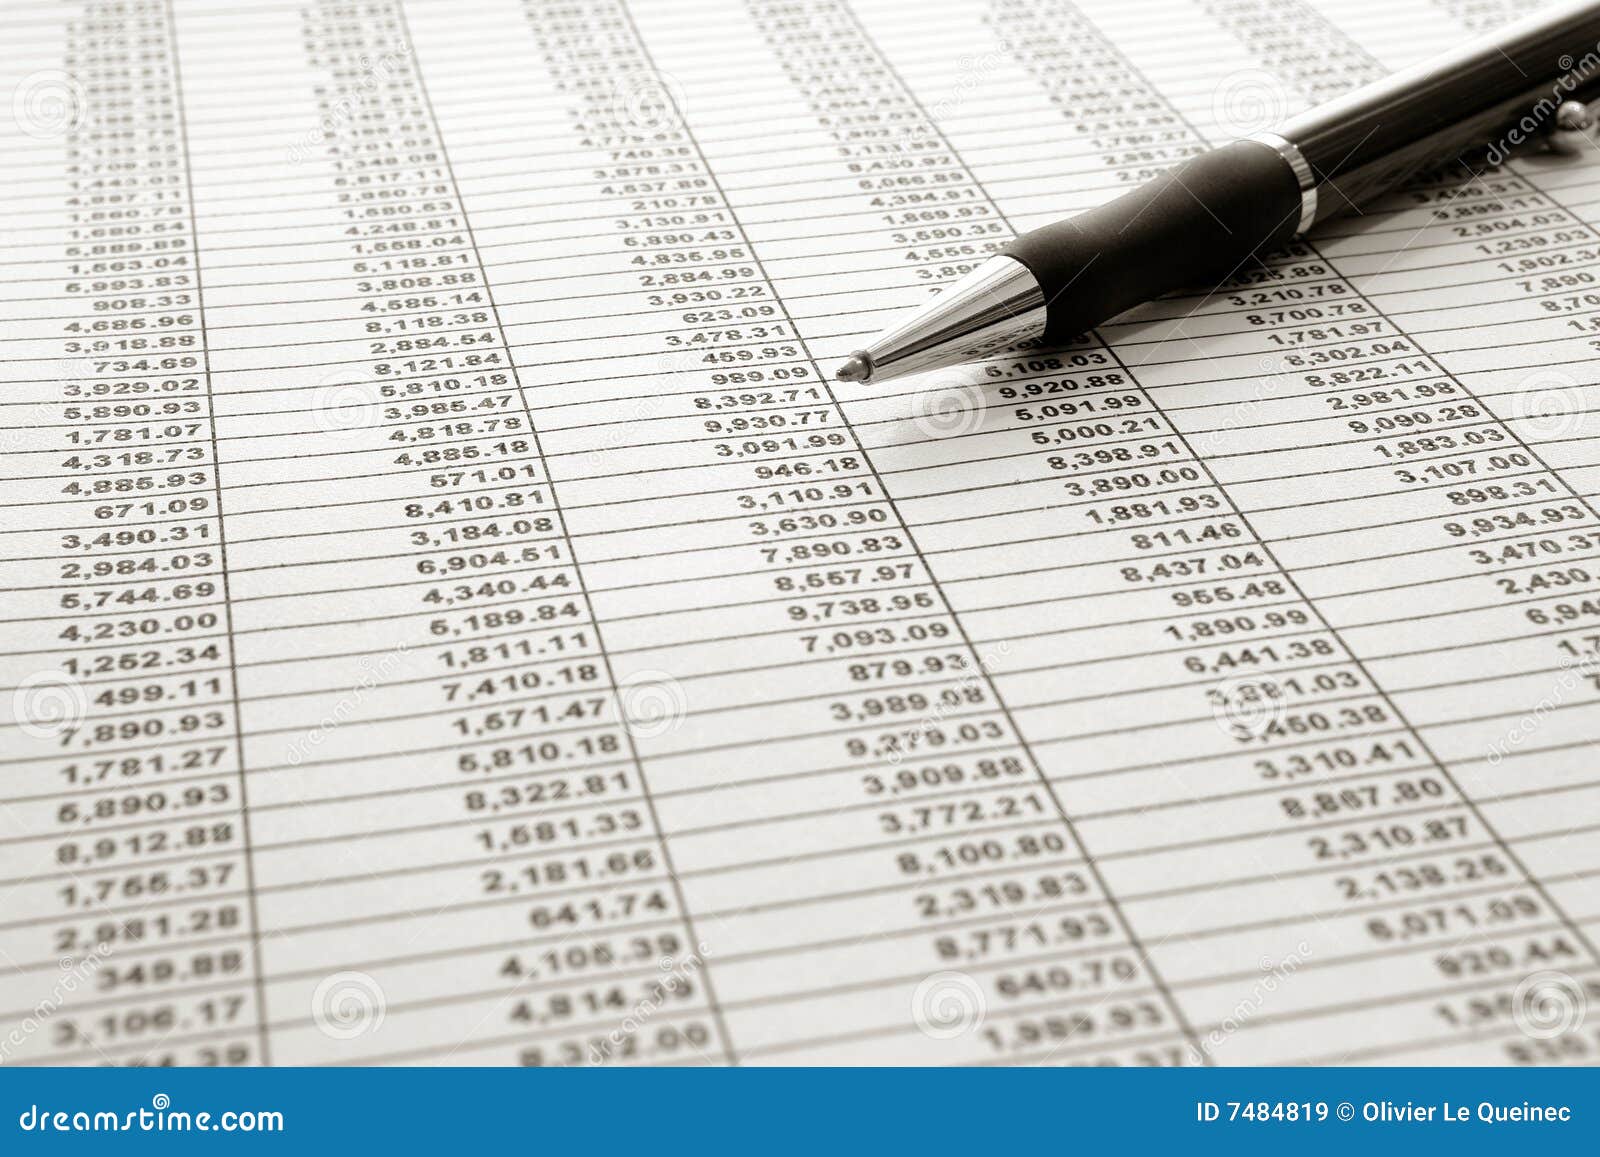 Financial Spreadsheet And Ballpoint Ink Pen Stock Image - Image of finance, balancing ...1300 x 957